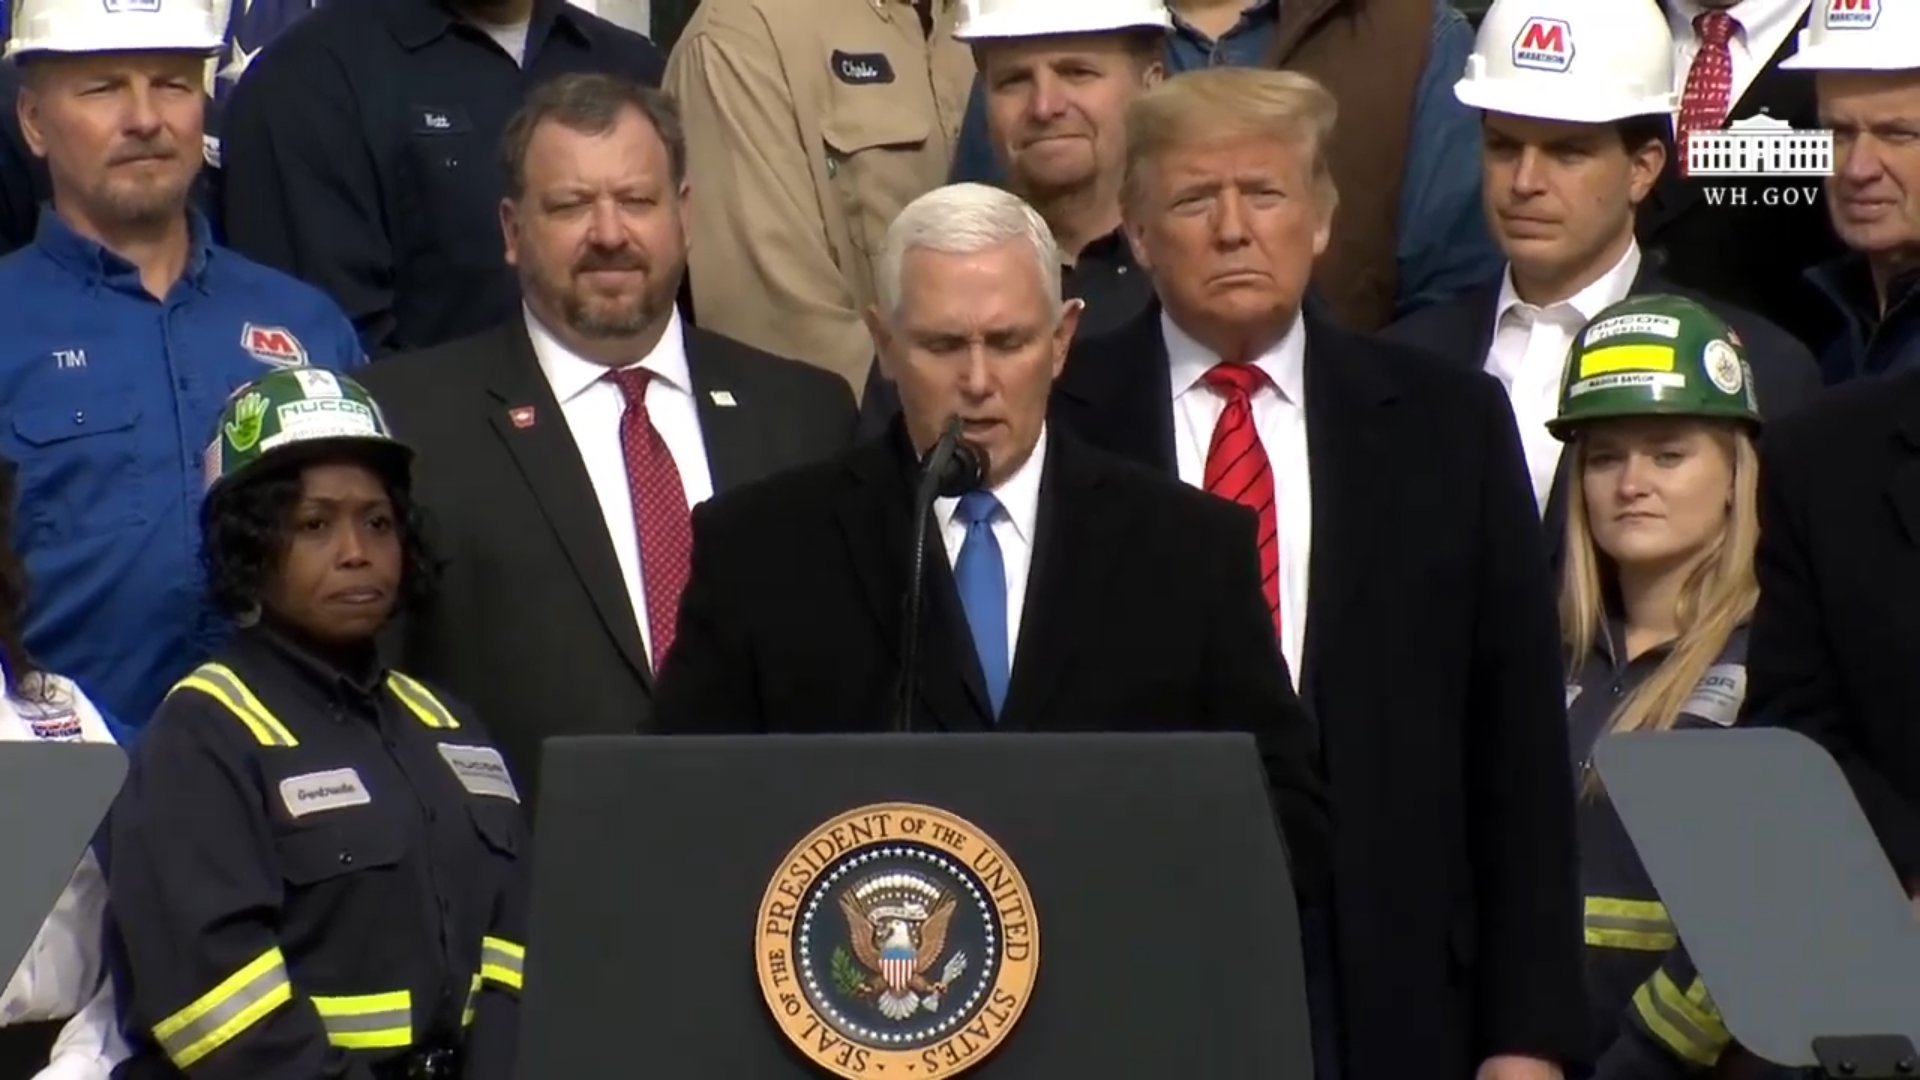 Vice President Mike Pence speaking at the USMCA signing event with Nucor Steel teammates Gertrude Pope, Nucor Steel Tuscaloosa (L) and Maggie Saylor, Nucor Steel Florida (R) behind him, along with President Trump. Also on stage (not pictured) were Matt Didelot, Nucor Steel Berkeley; Joe Craig, Vulcraft Texas; and Chris Paul, Vulcraft New York.